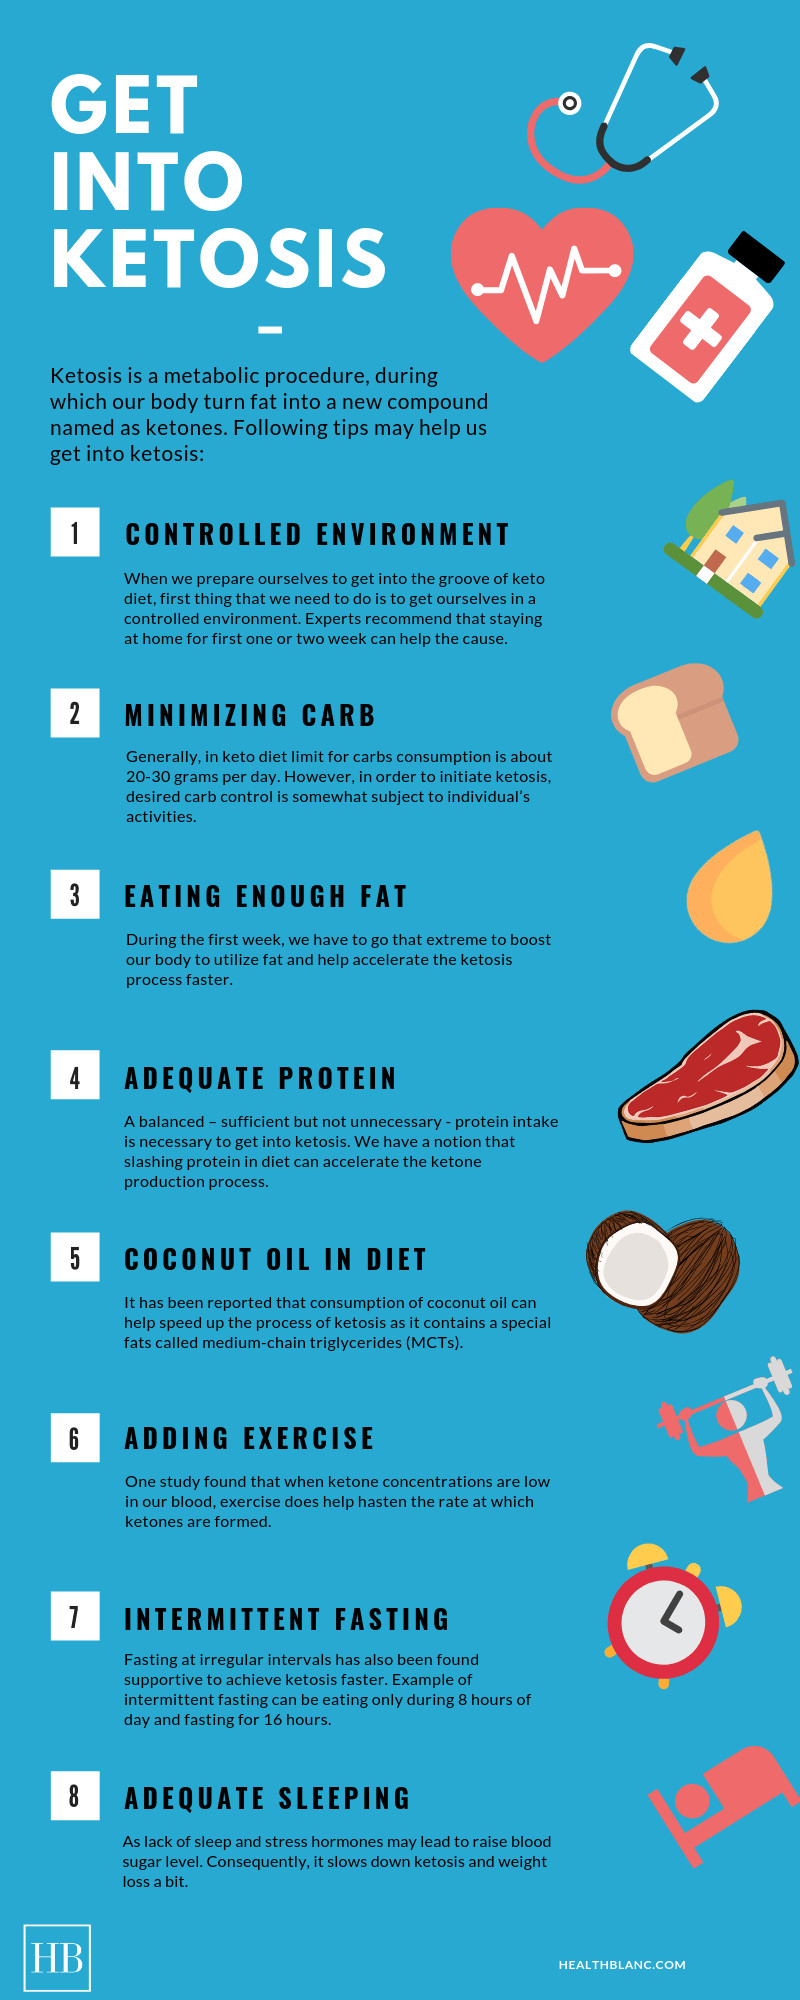 How To Start Ketosis Diet
 Ultimate Guide To Get Into Ketosis 8 Simple Tips You Can